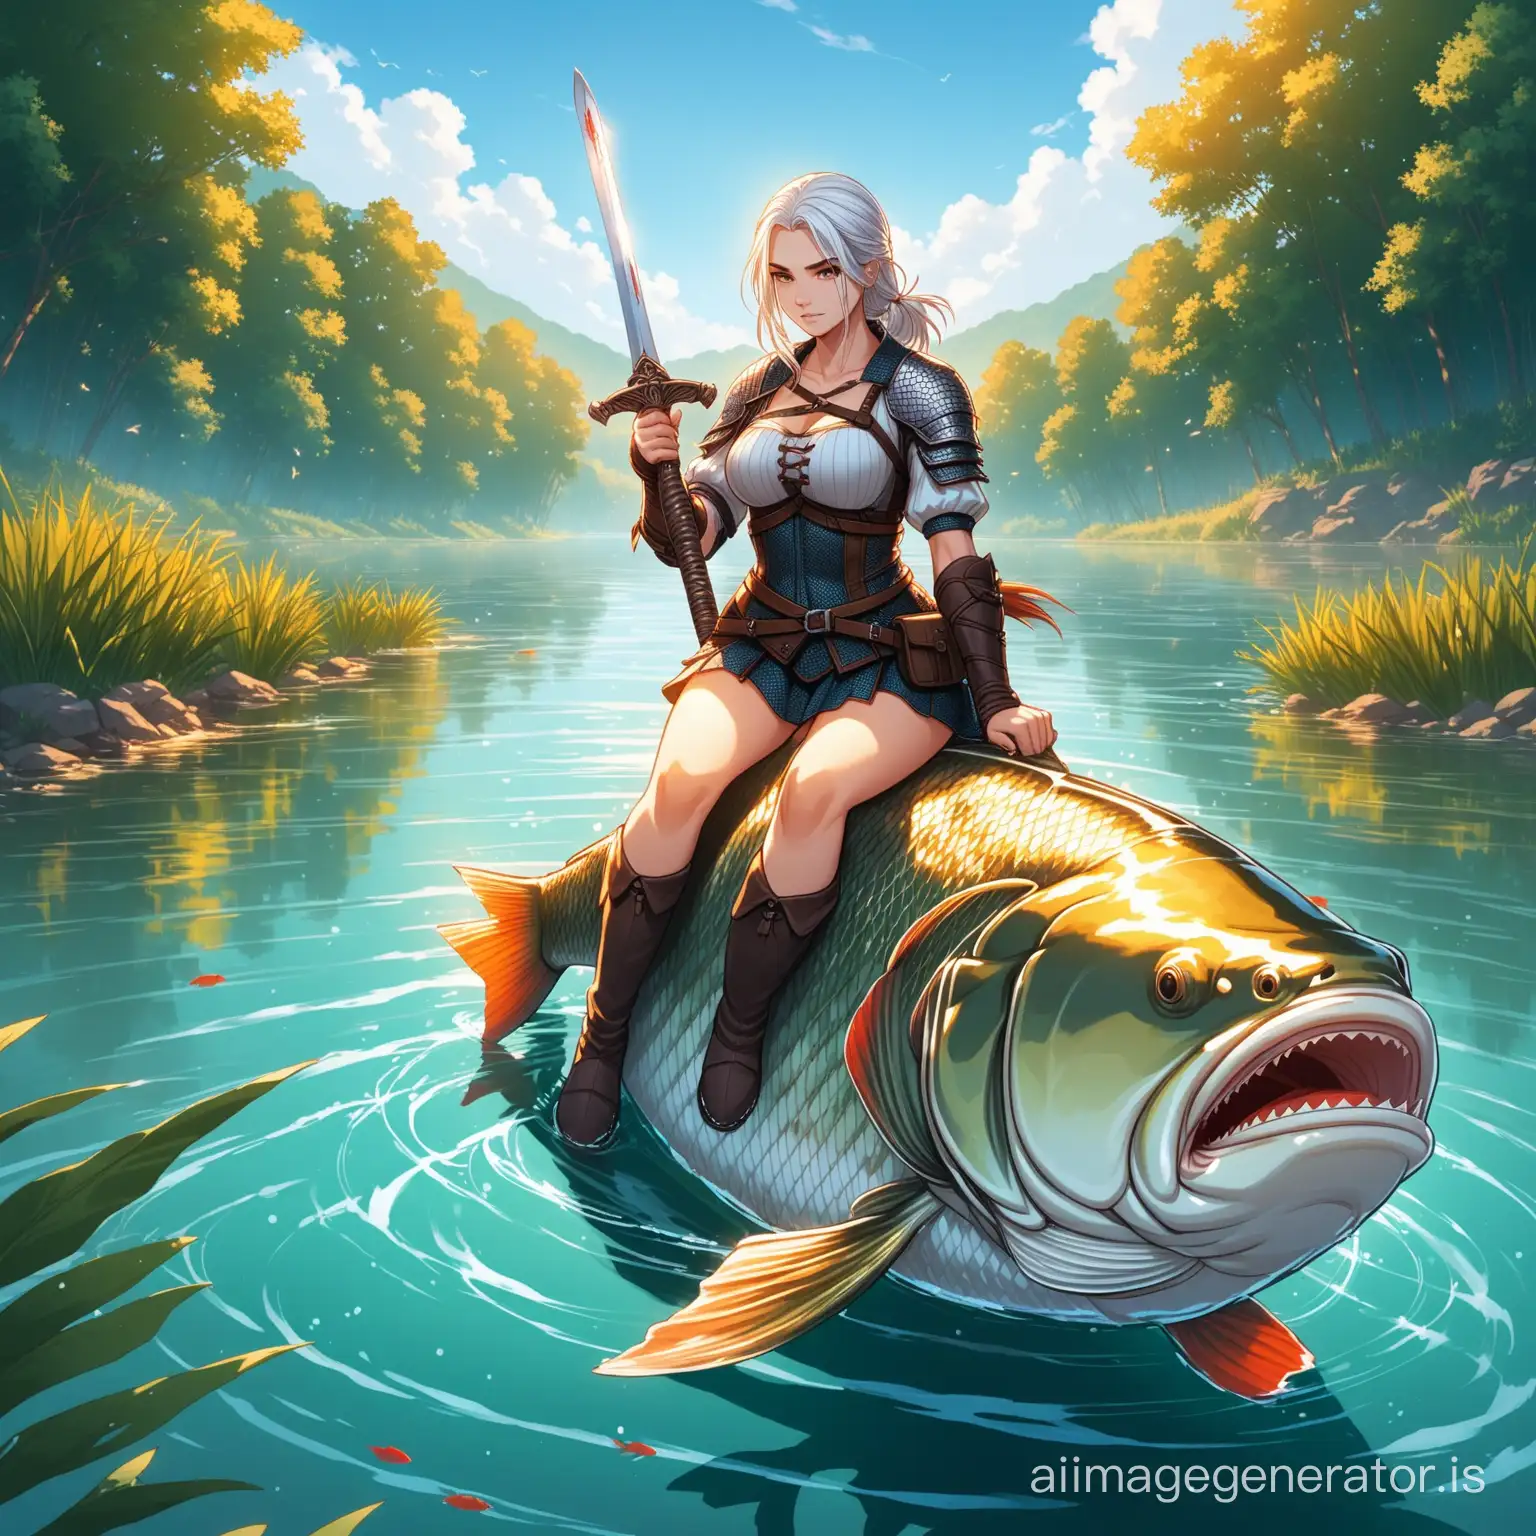 a girl resembling Geralt rides on a crucian carp in the river sits on a fish, with a sword in her hands